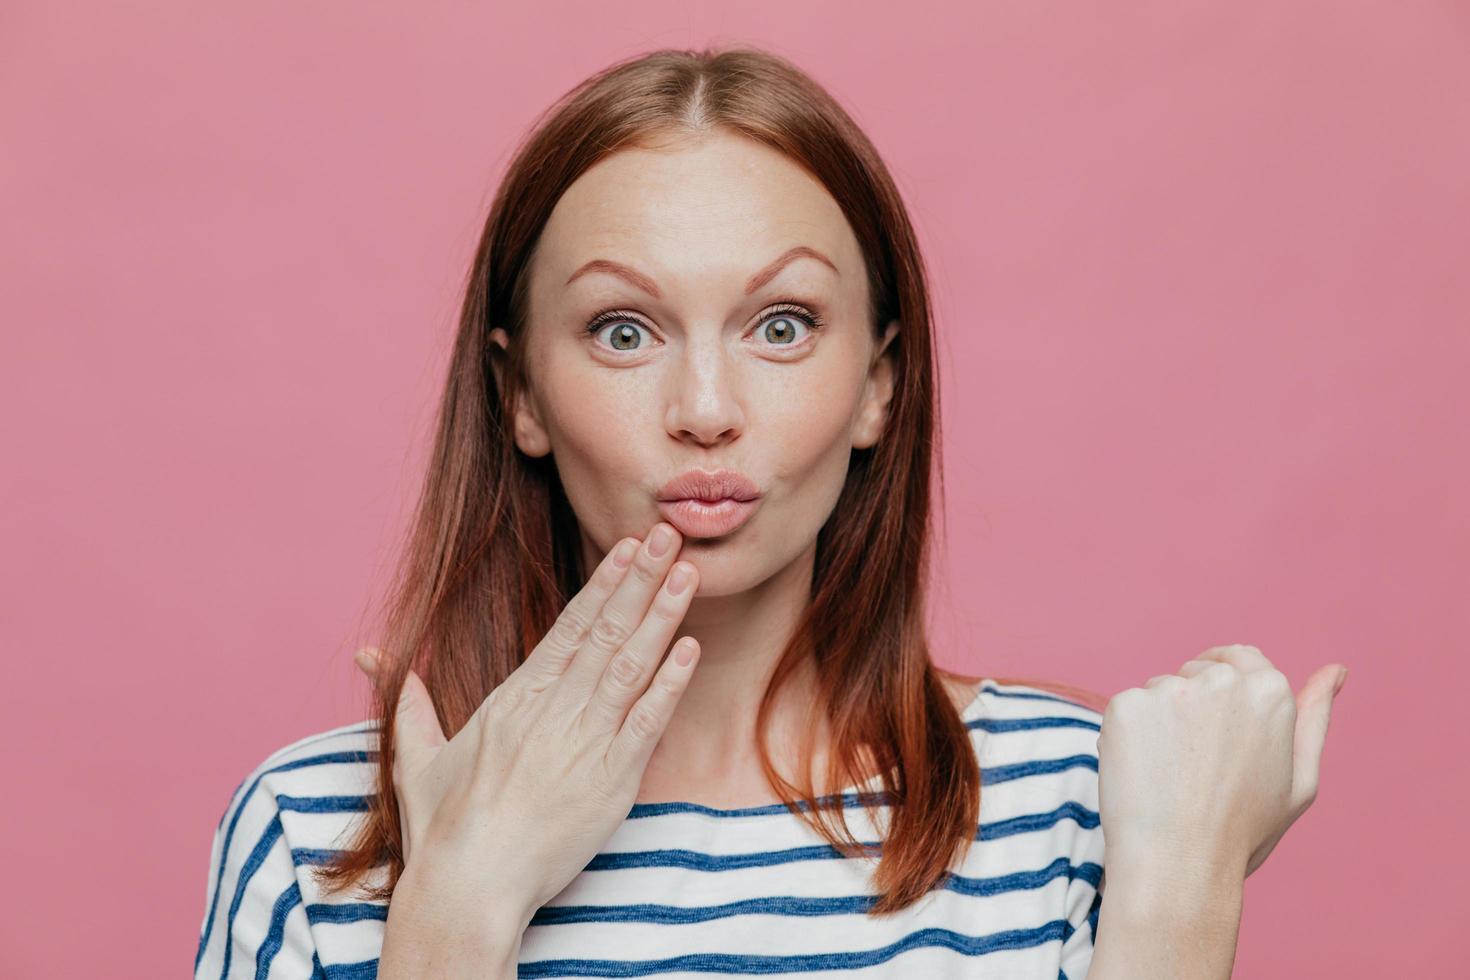 Close up shot of attractive woman raises eyebrows, pouts lips, keeps hand near mouth, has brown hair, surprised by something, models over pink background. People, facial expressions and beauty concept photo